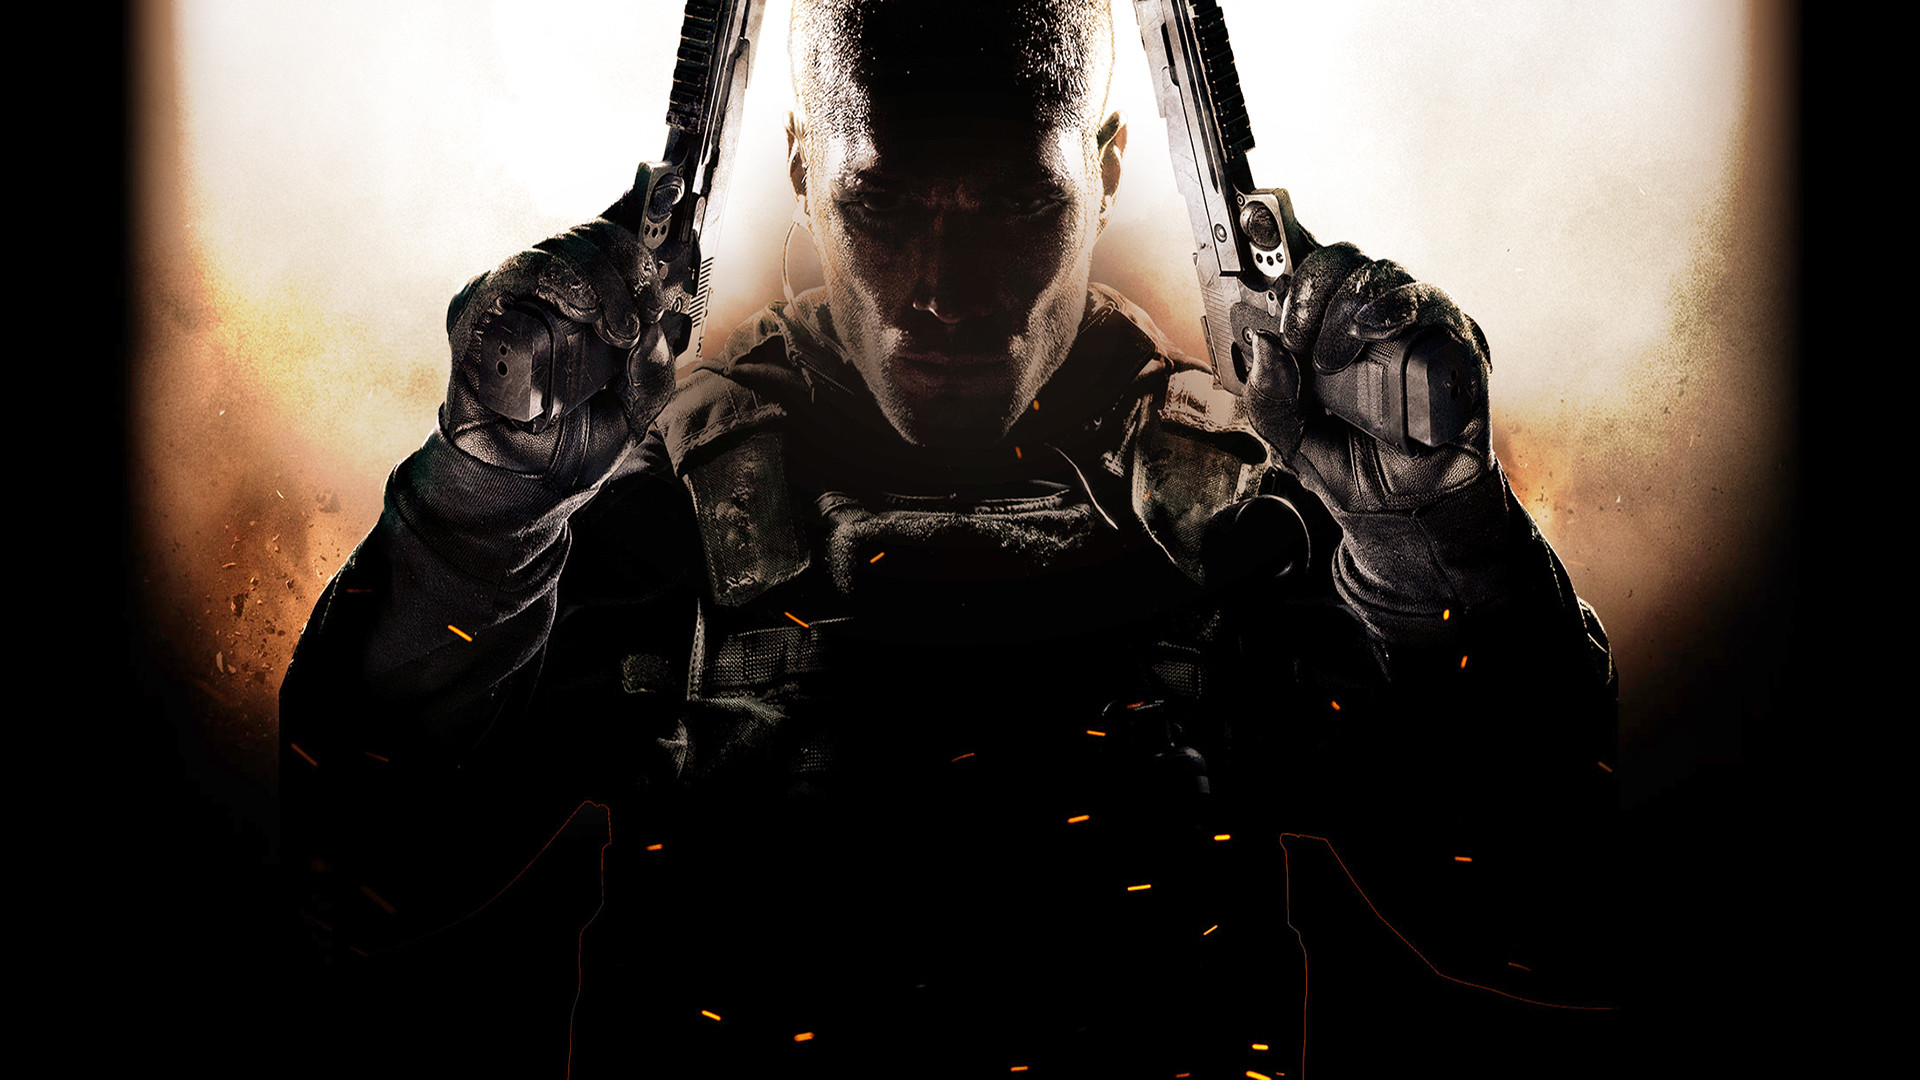 Call Of Duty Black Ops 2 Wallpapers Pack Download - Call Of Duty Black Ops  2 Hd - 1920x1080 Wallpaper 